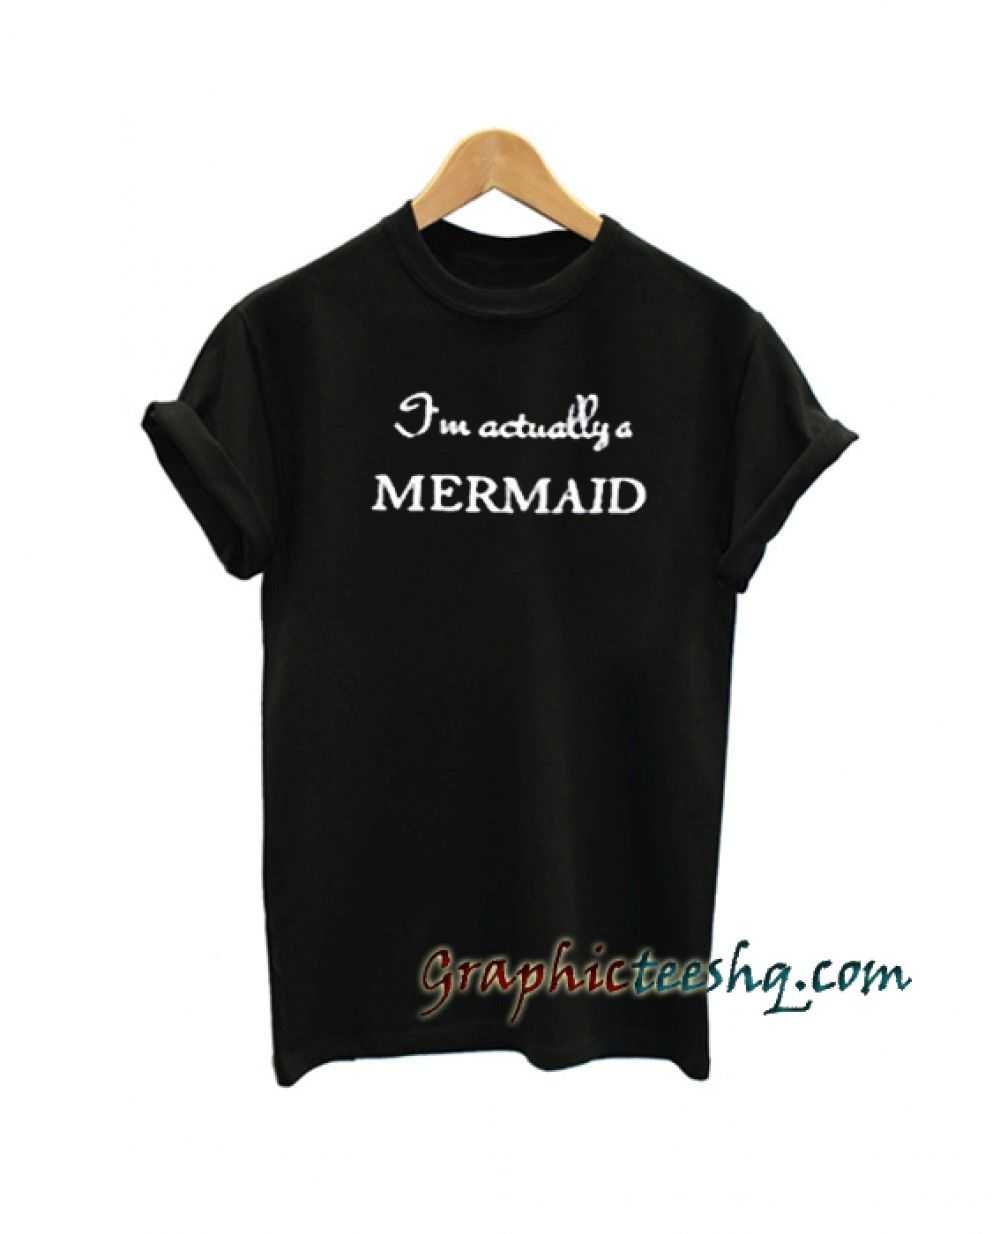 I'm actually a mermaid tee shirt for adult men and women. It feels soft